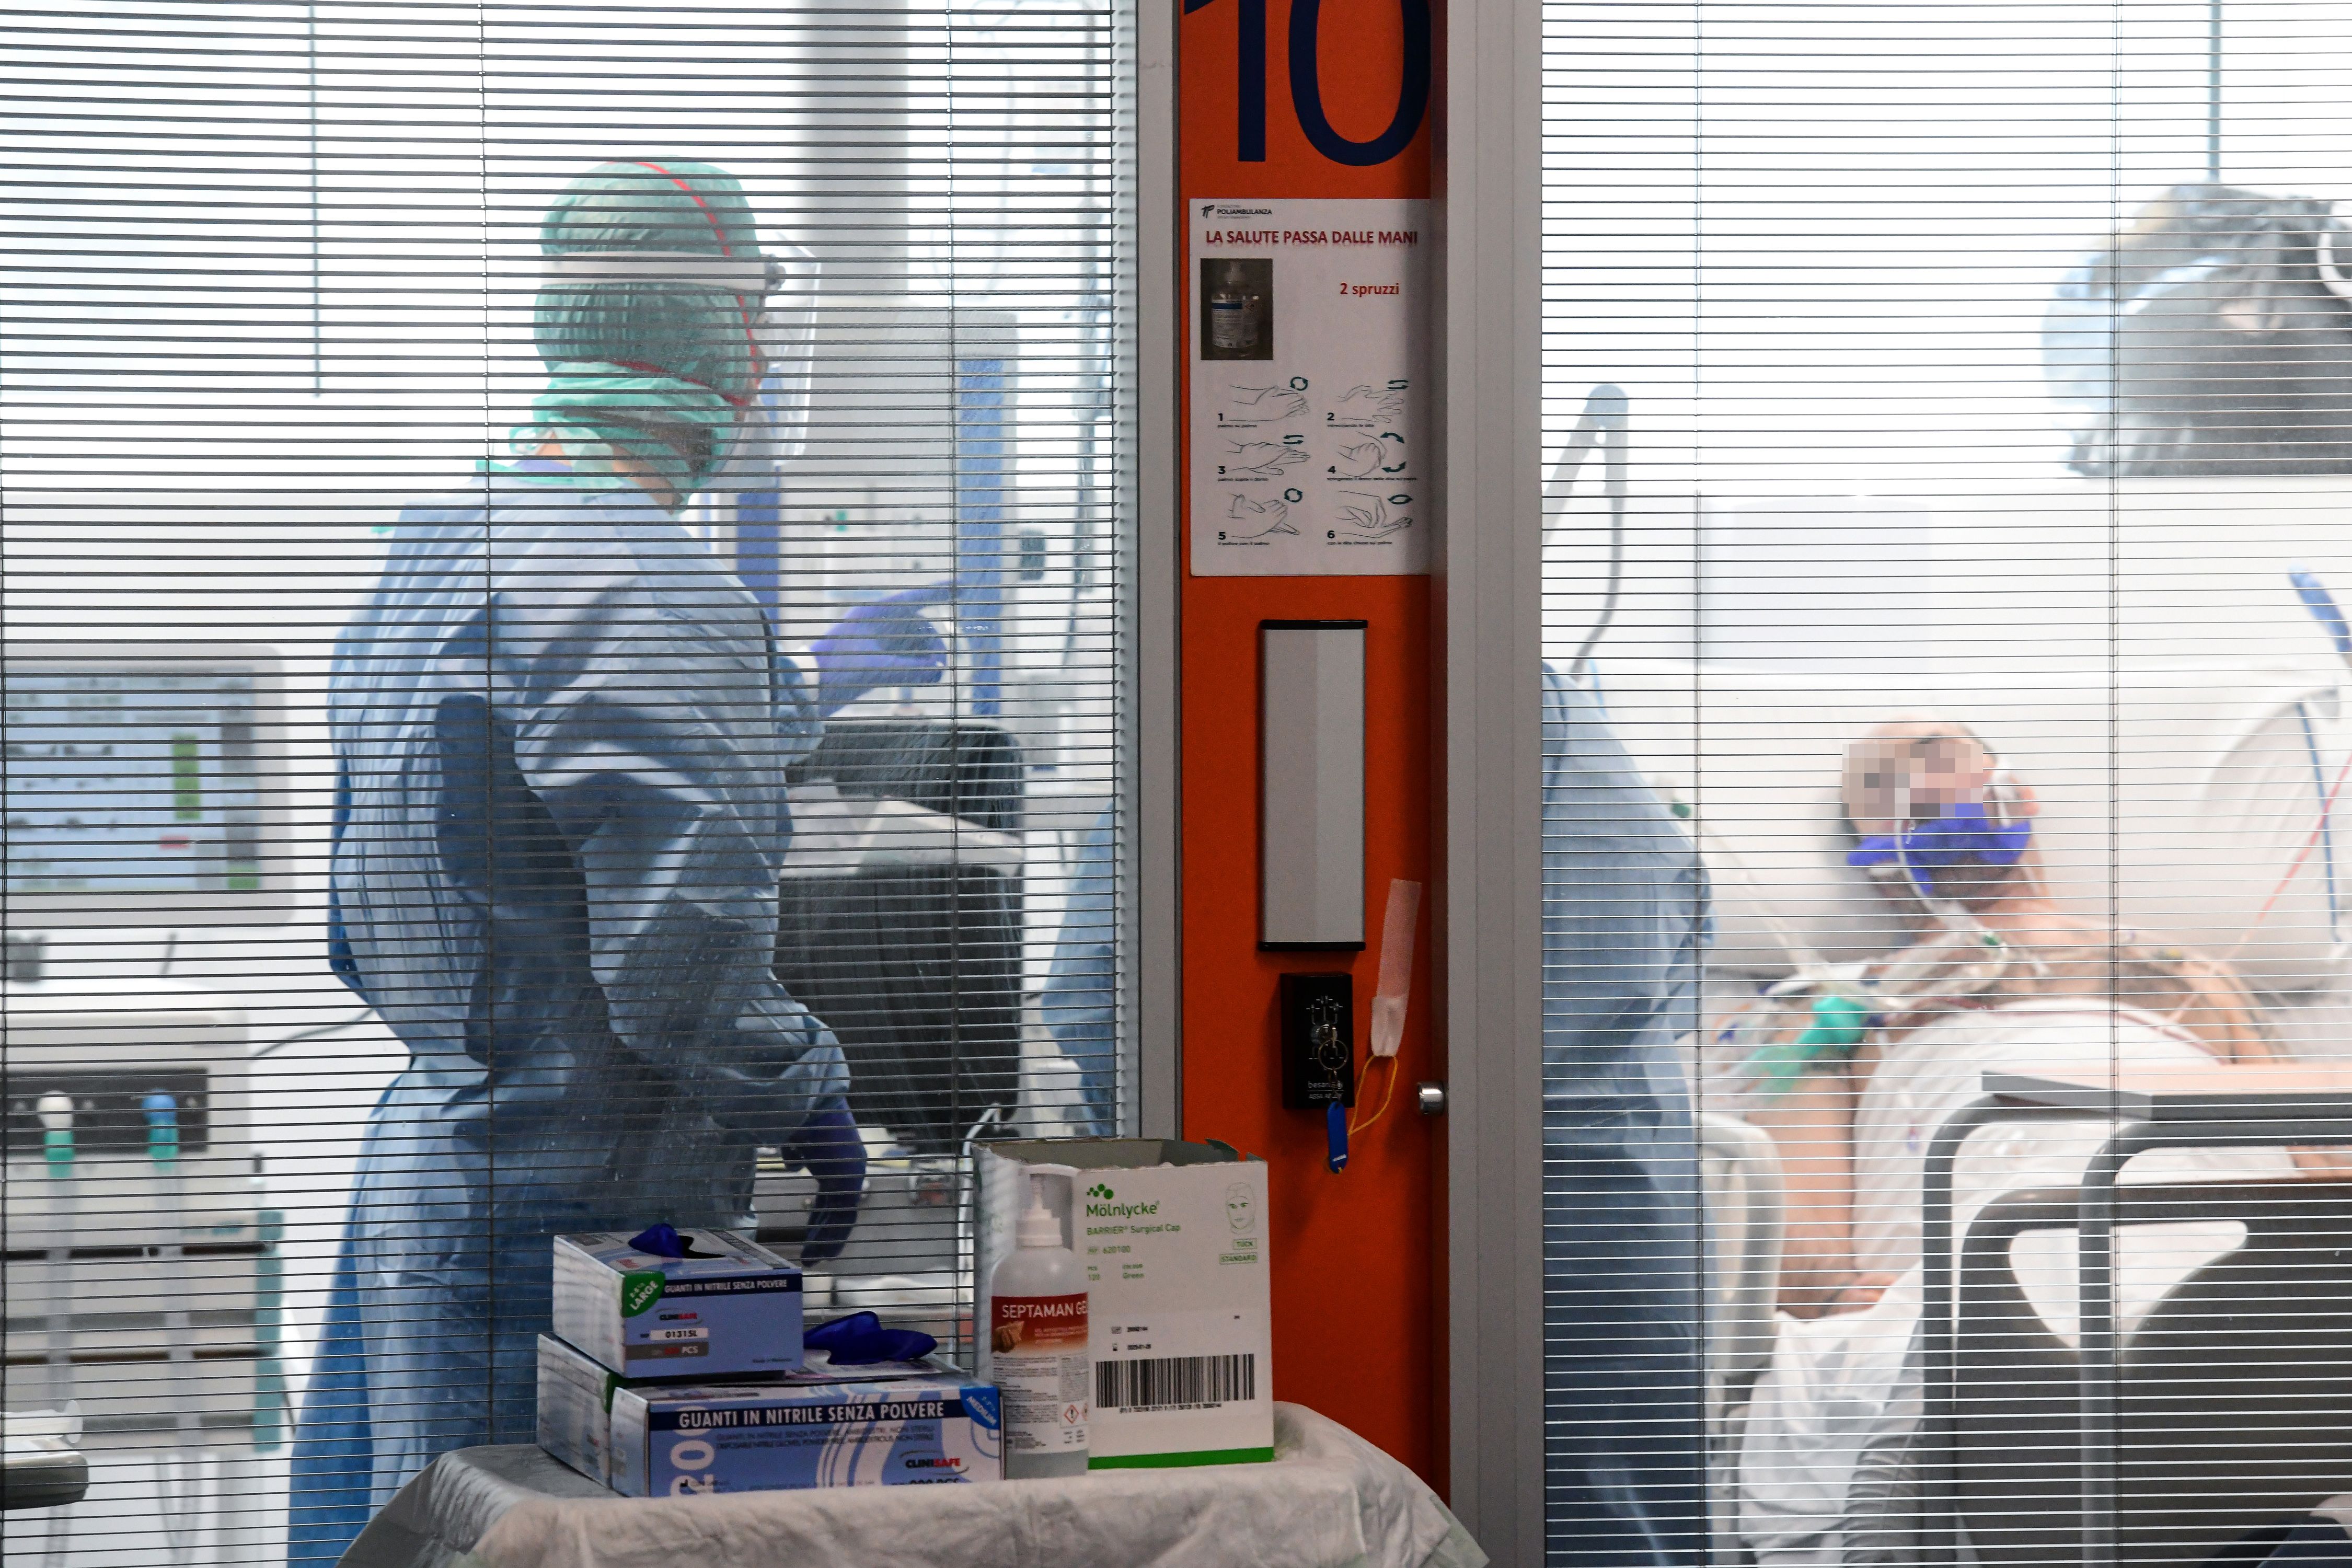 Medical workers wearing a face make and protection gear tend to a patient inside the new coronavirus intensive care unit of the Brescia Poliambulanza hospital, Lombardy, on March 17, 2020. (Piero Cruciatti—AFP/Getty Images)